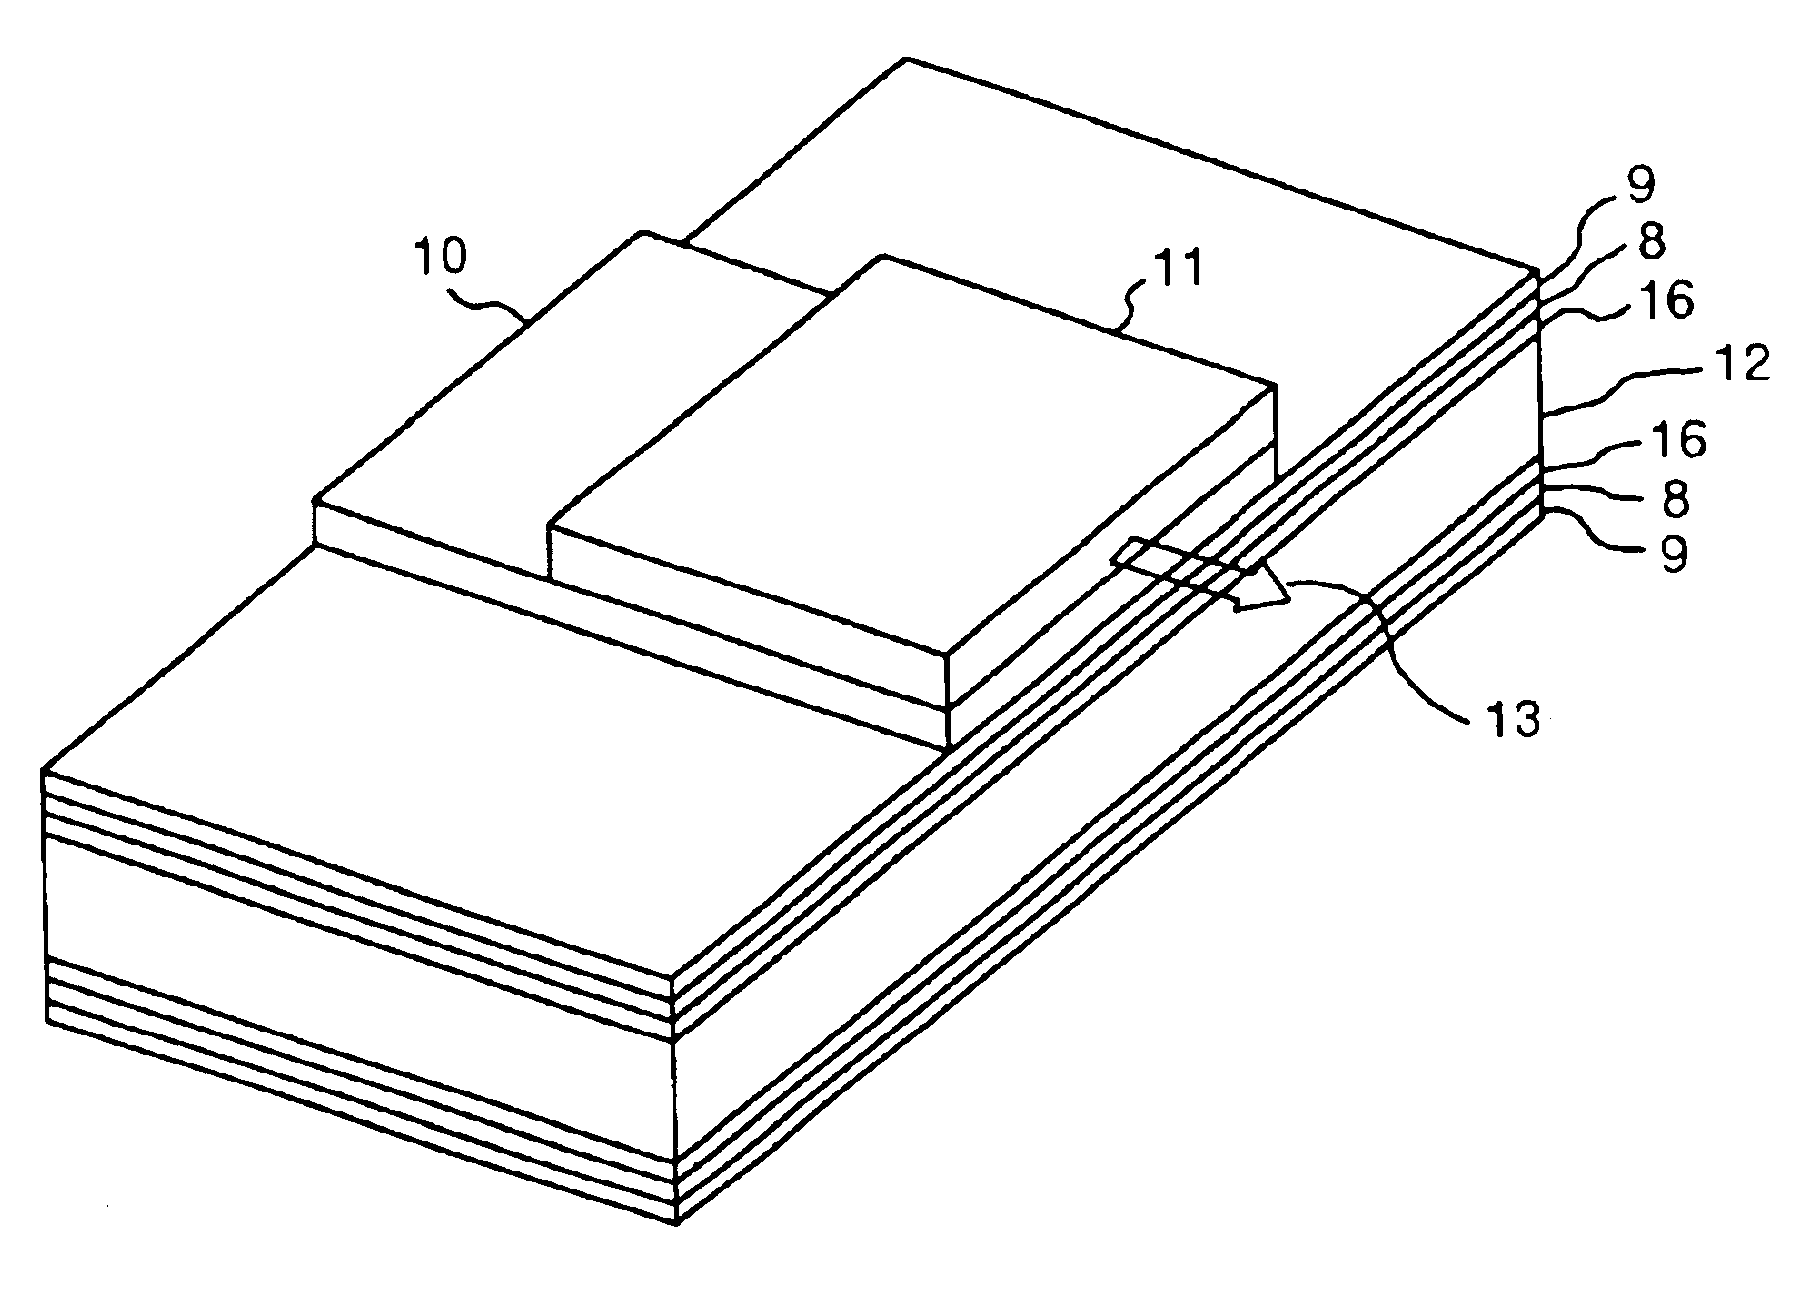 Aluminum nitride sintered body and substrate for electronic devices